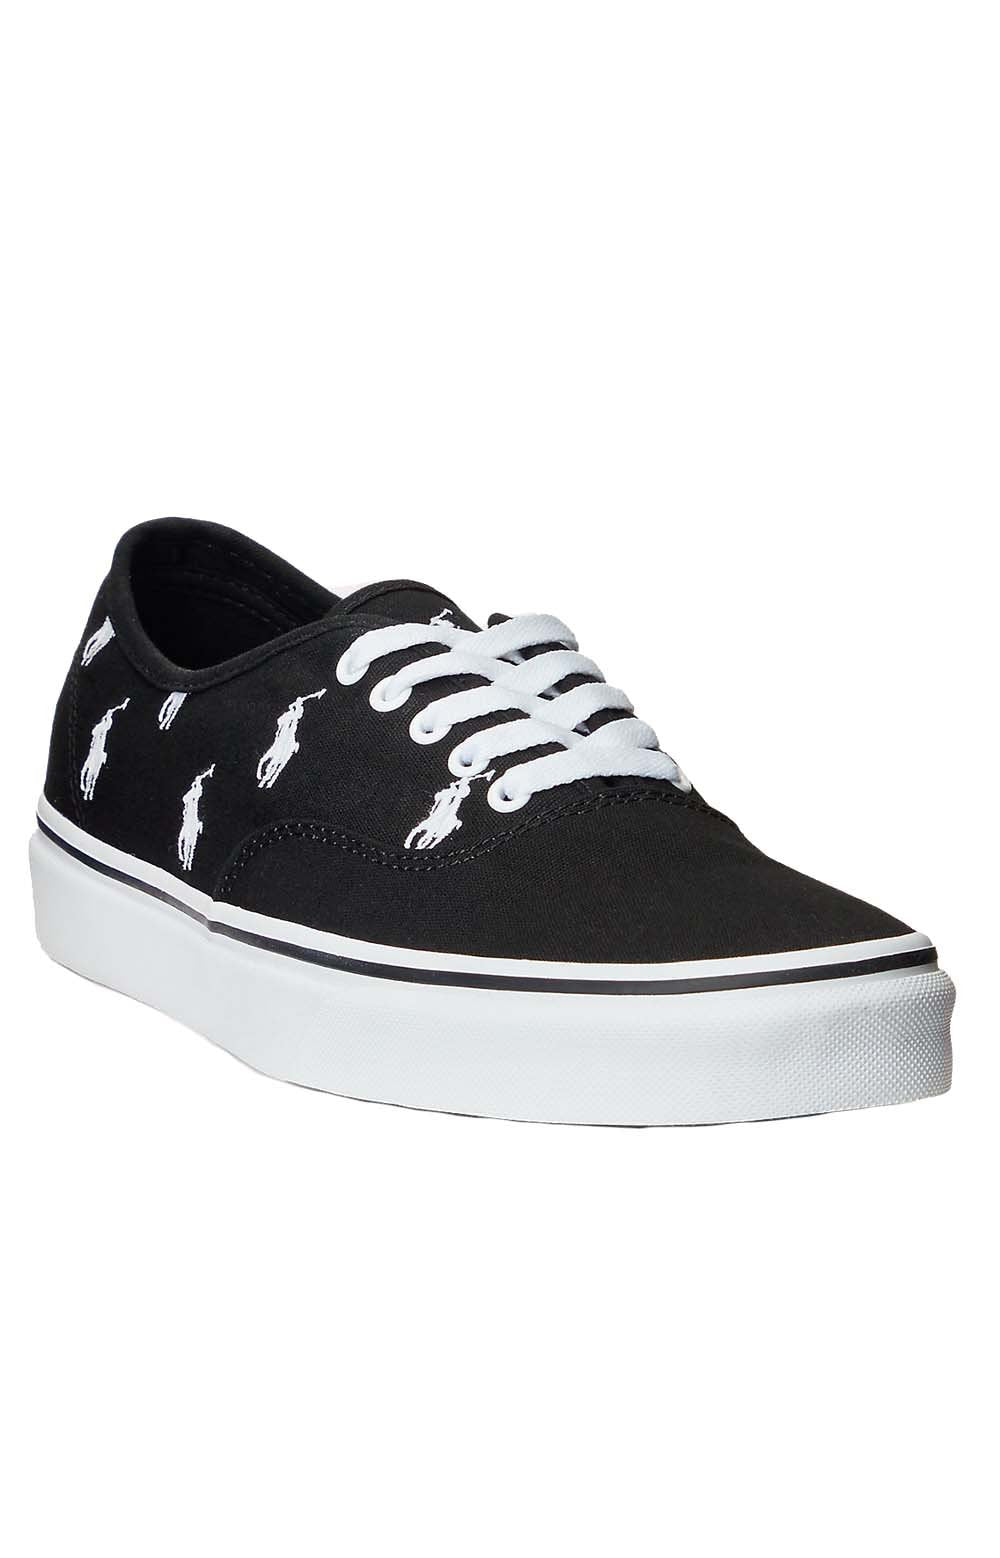 (816841209015) Keaton Canvas Shoes - Black/All Over Pony